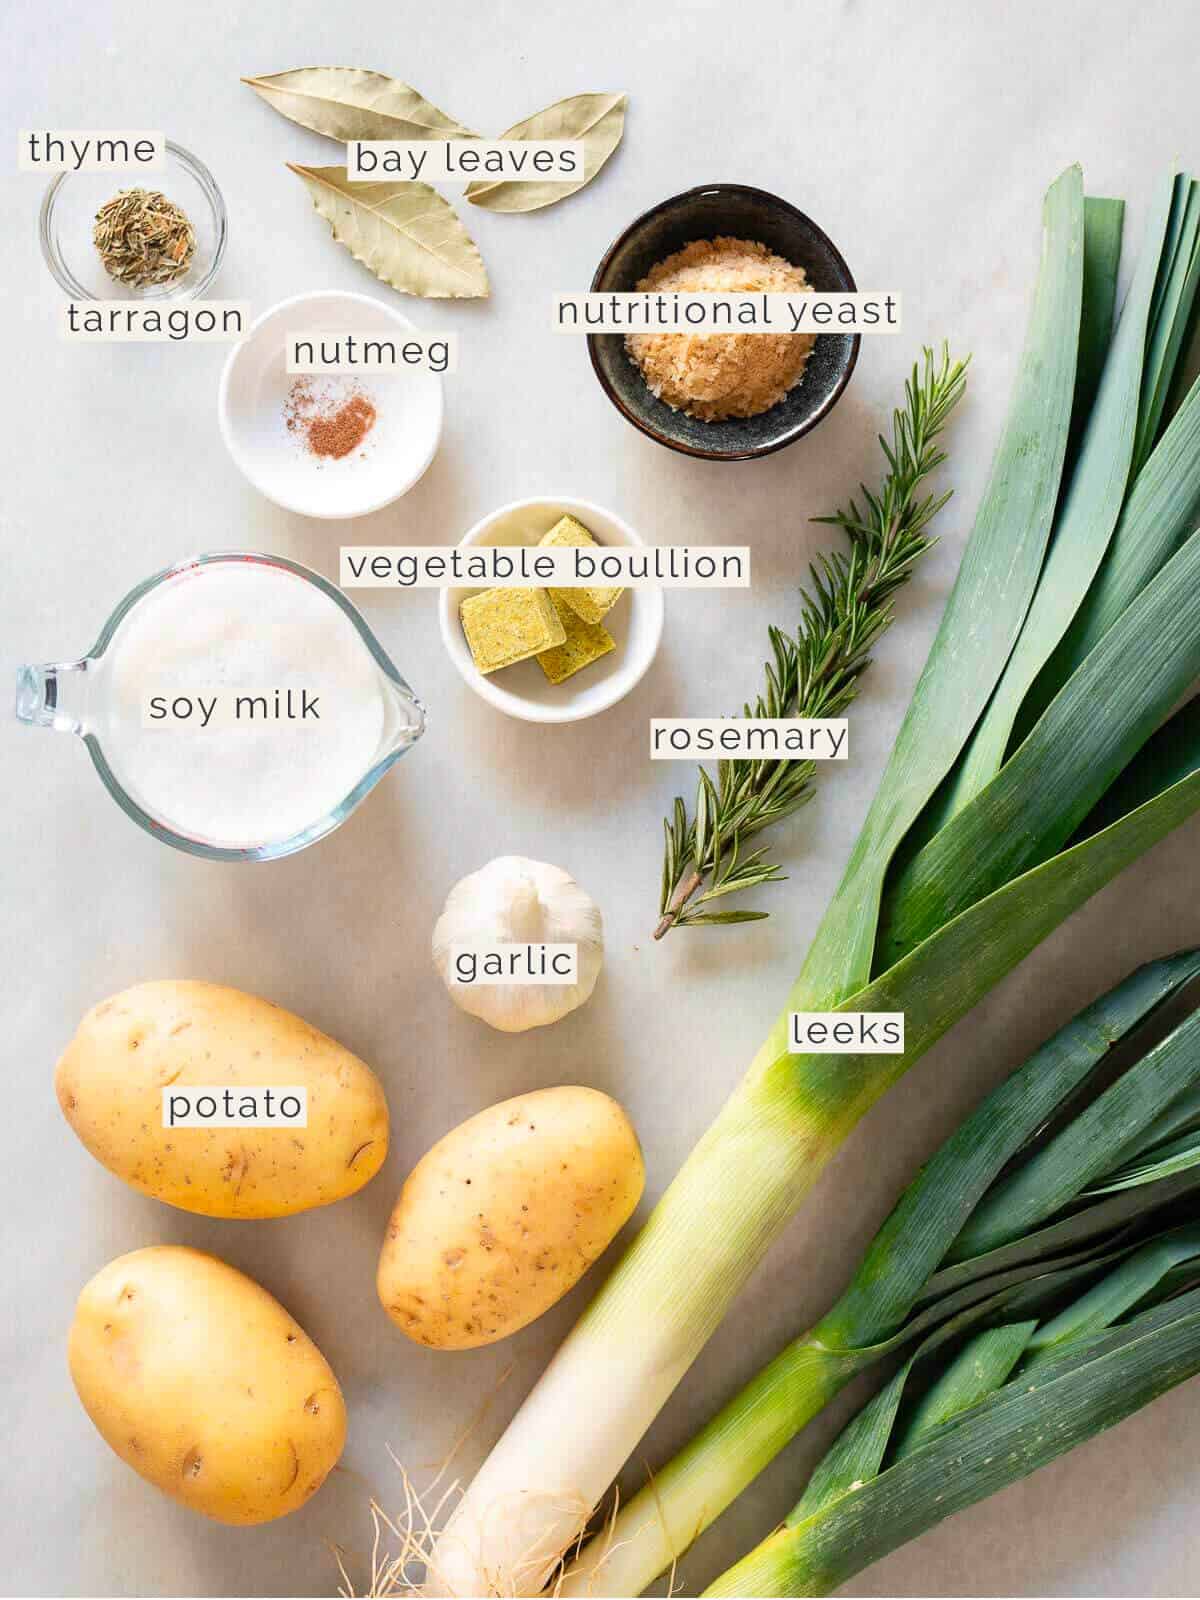 labeled ingredients to make a healthy leek and potato soup.